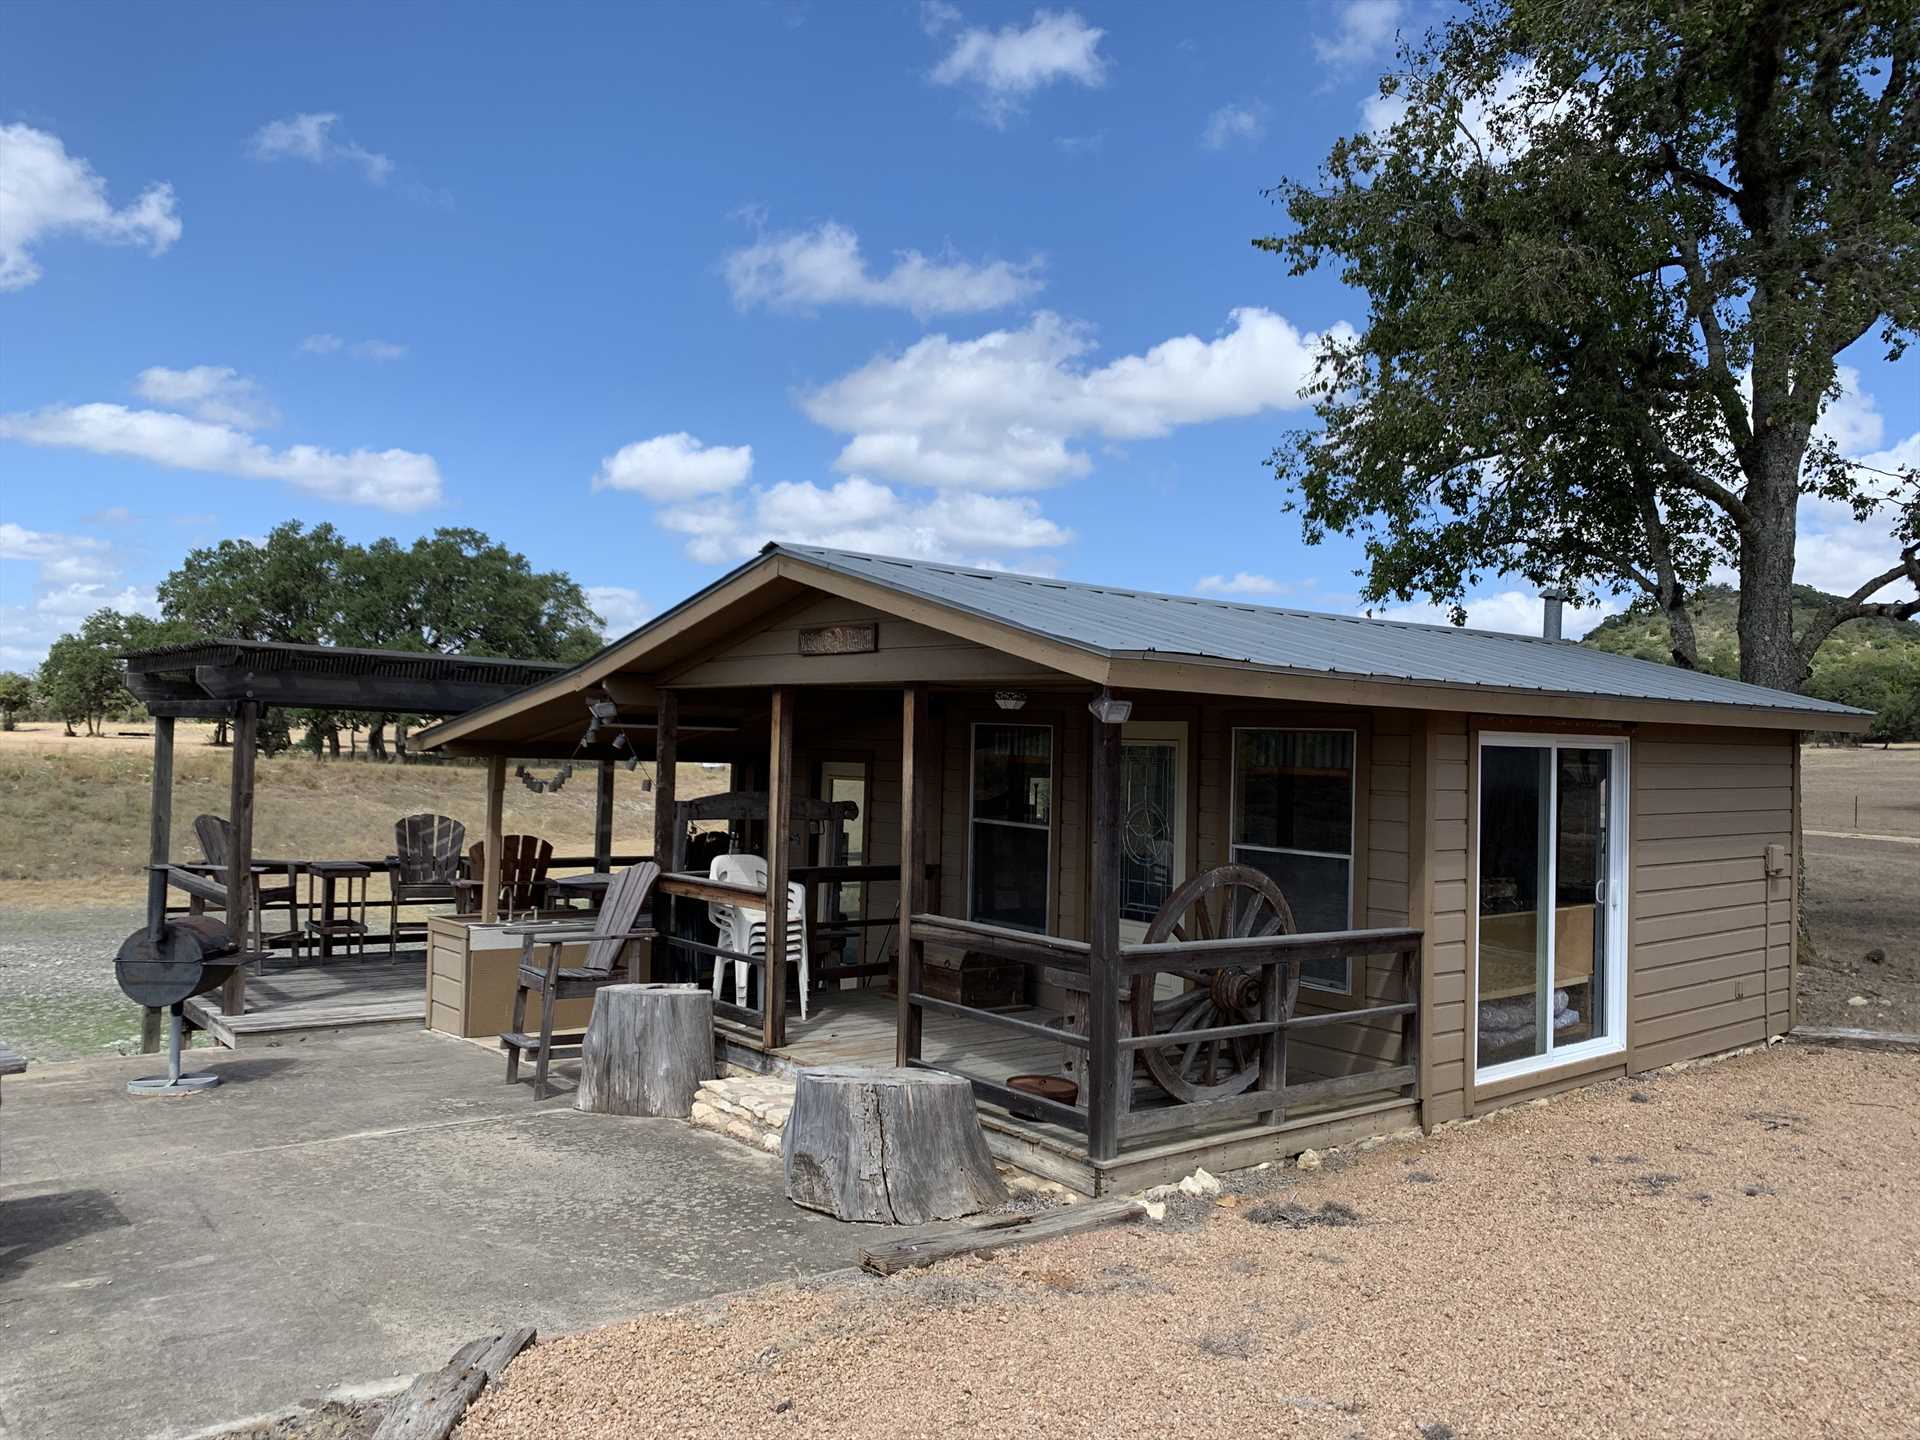                                                 A shared pavilion provides space and cooking accommodations for all the guests at Tabasco Ranch.